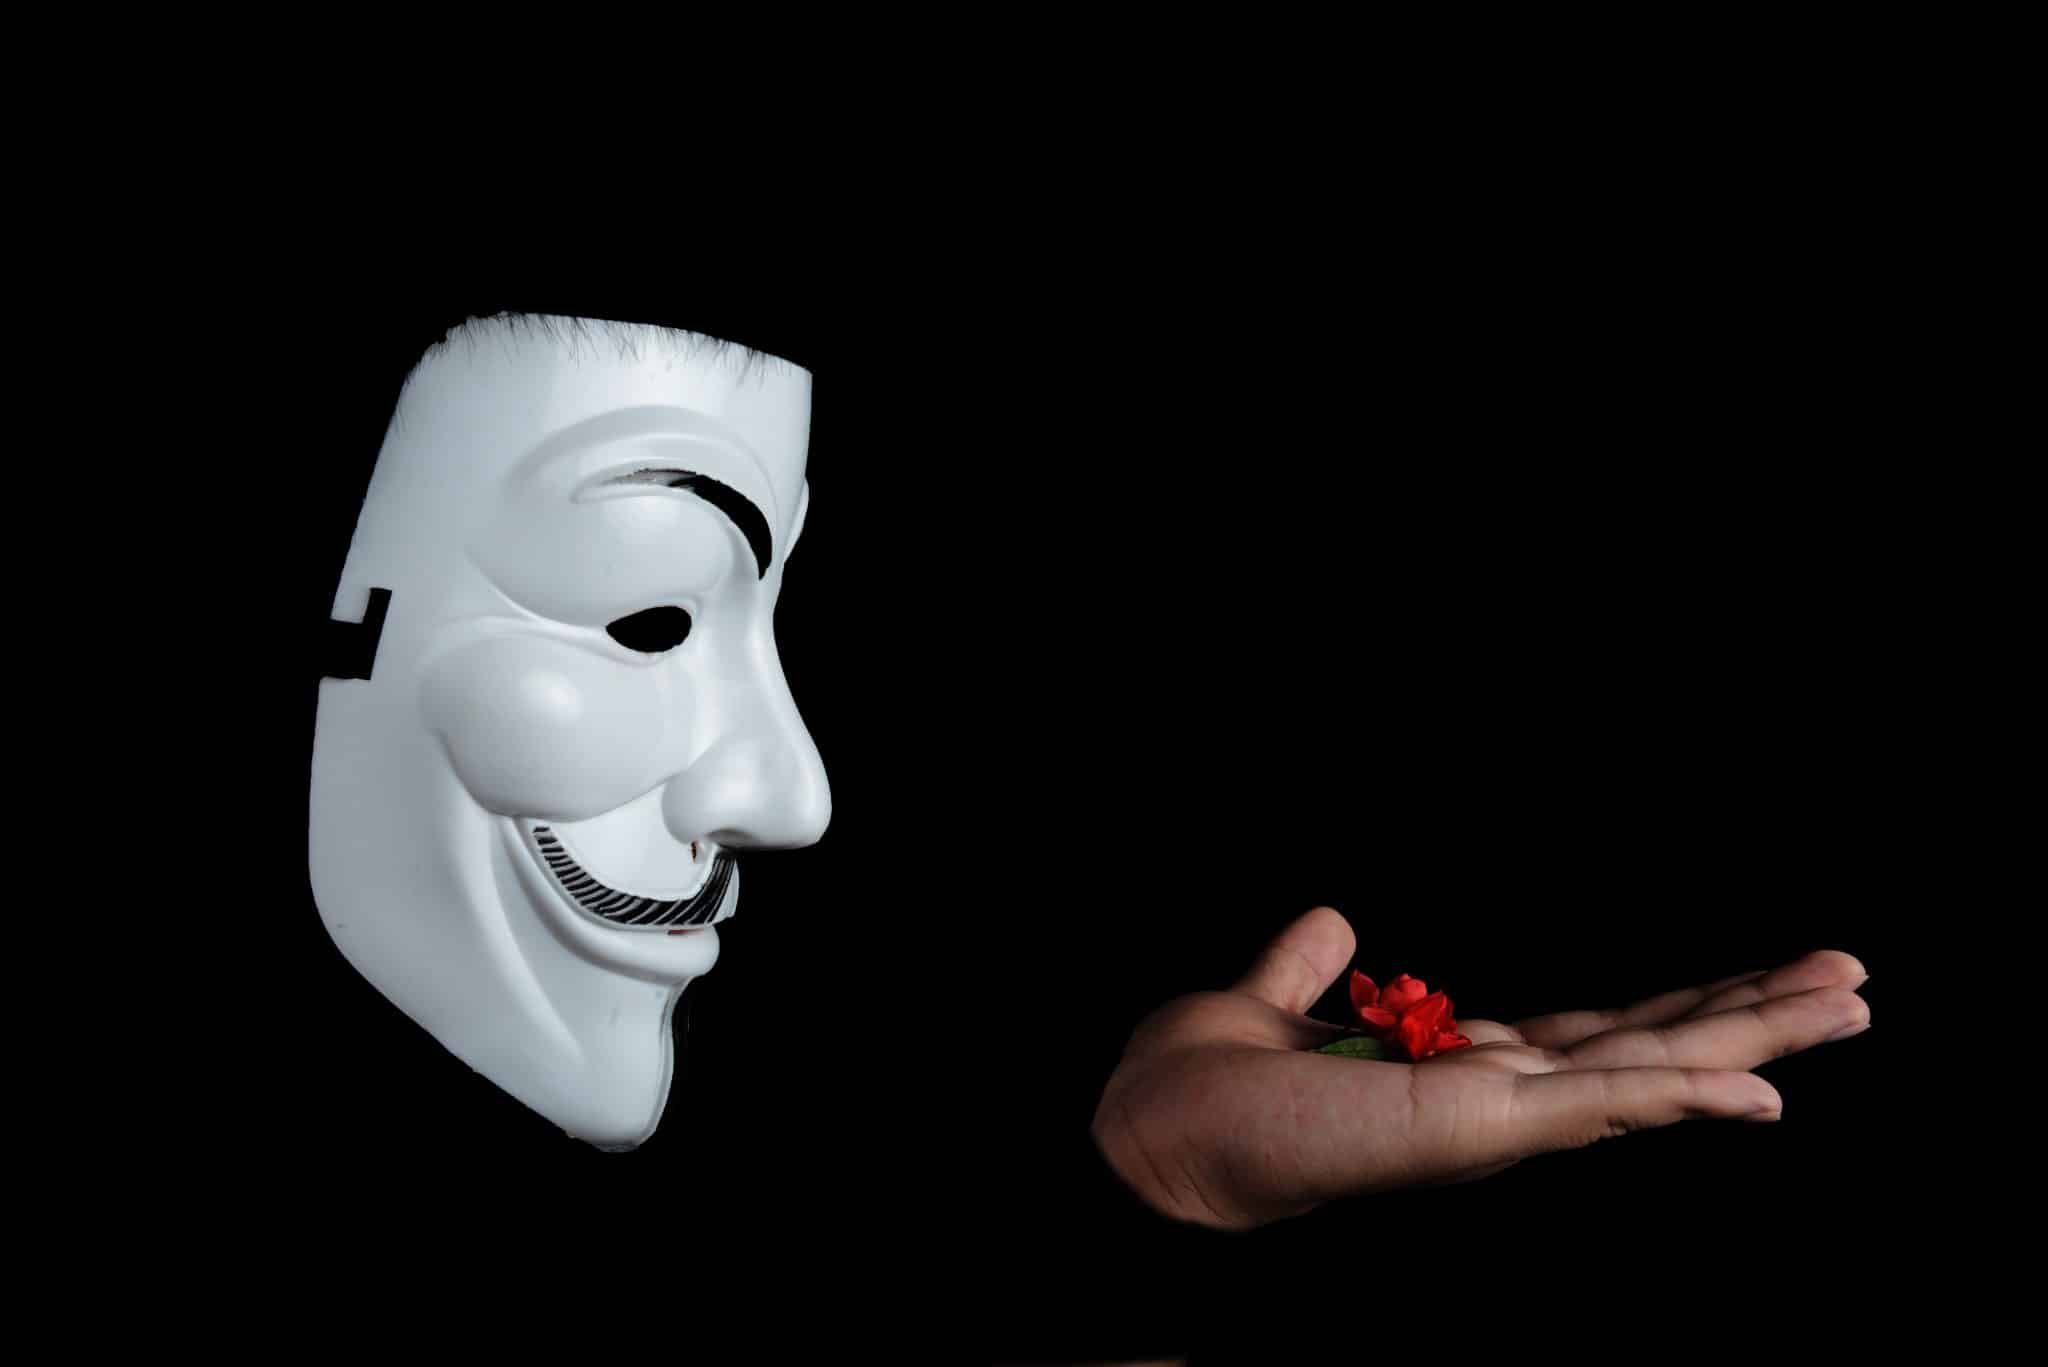 Photo of guy fawkes mask with red flower on top on hand